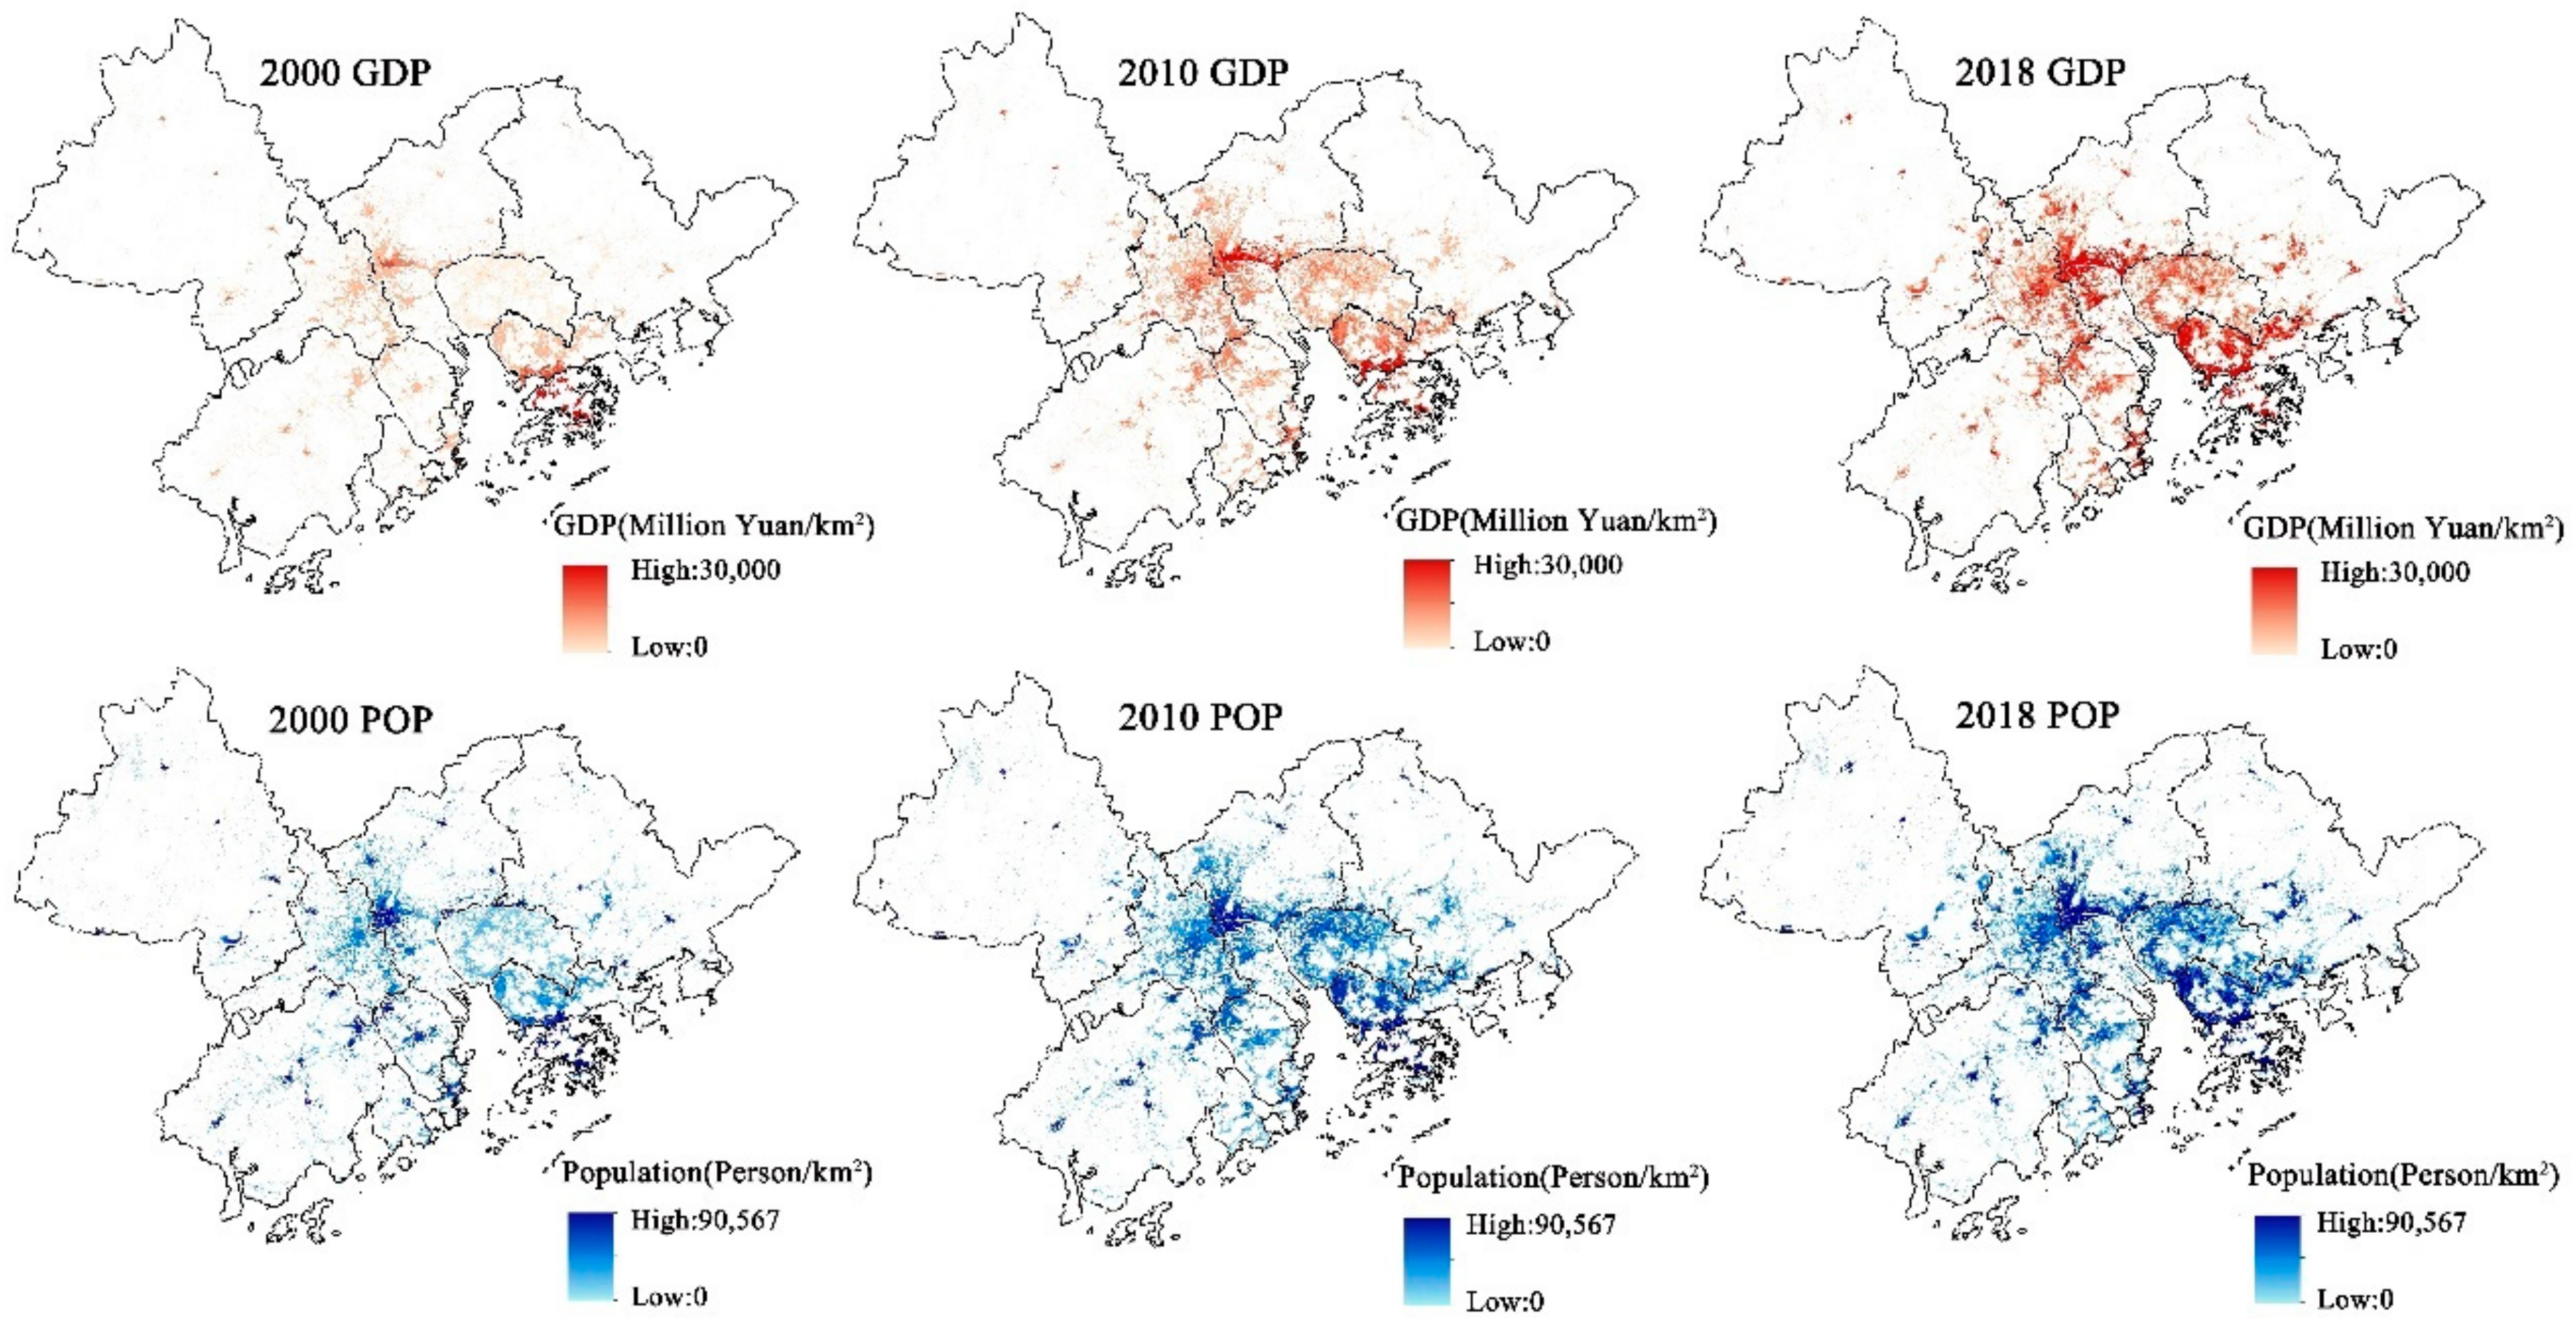 Sustainability | Free Full-Text | Urbanization Impacts on Natural Habitat  and Ecosystem Services in the Guangdong-Hong Kong-Macao “Megacity”